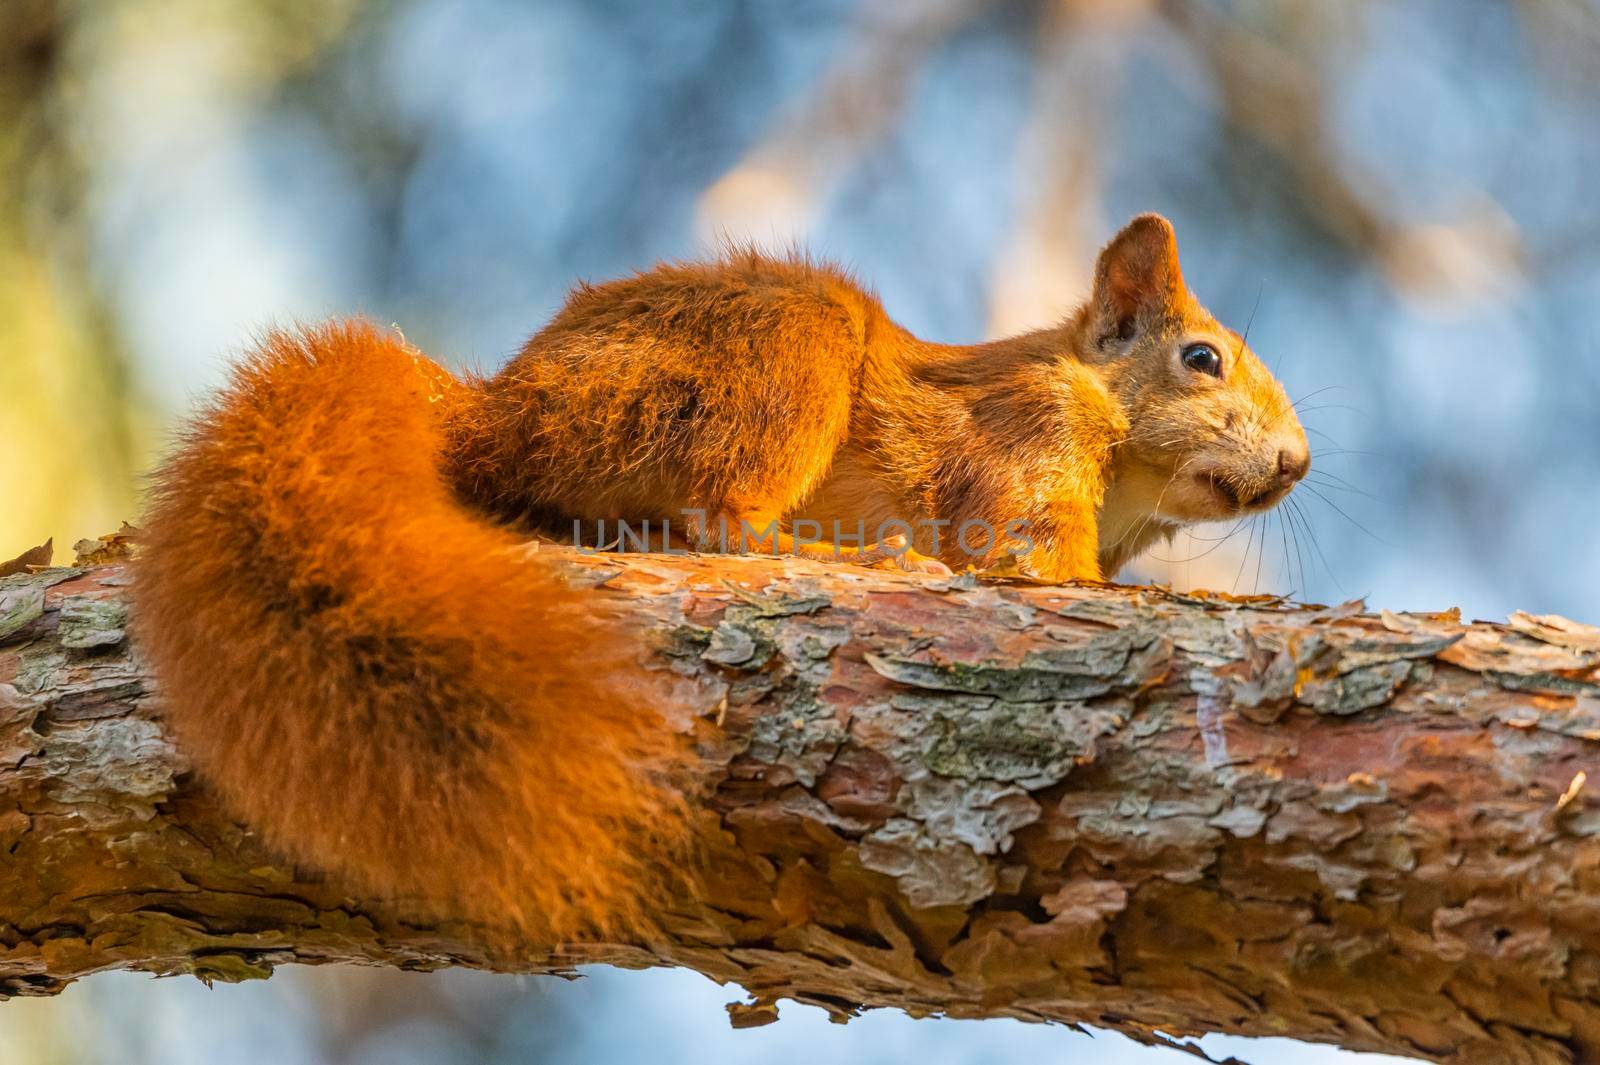 Red squirrel, sciurus vulgaris, standing on a branch at sunset